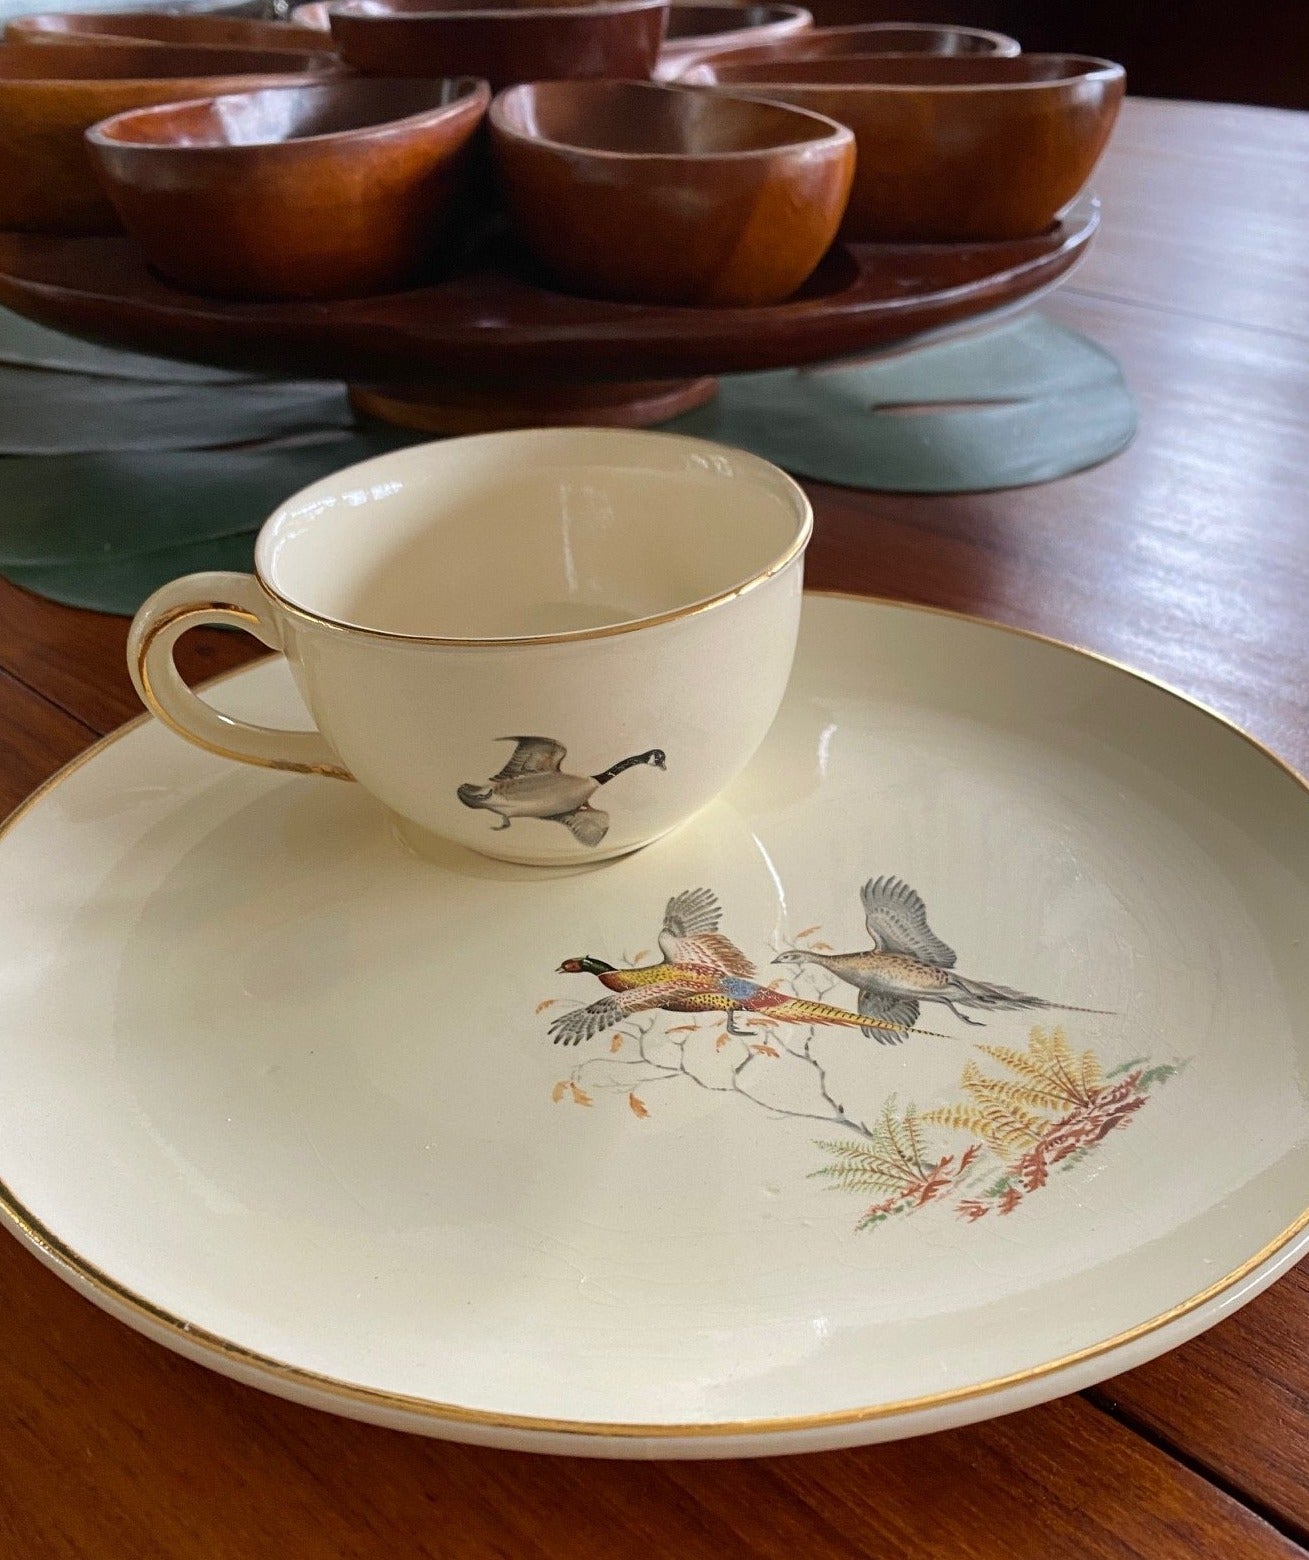 Rare vintage china dish set of four with cups. Mallard duck and Pheasants design.  'Ornis', made in West Germany, by Waechtersbach- Cook Street Vintage